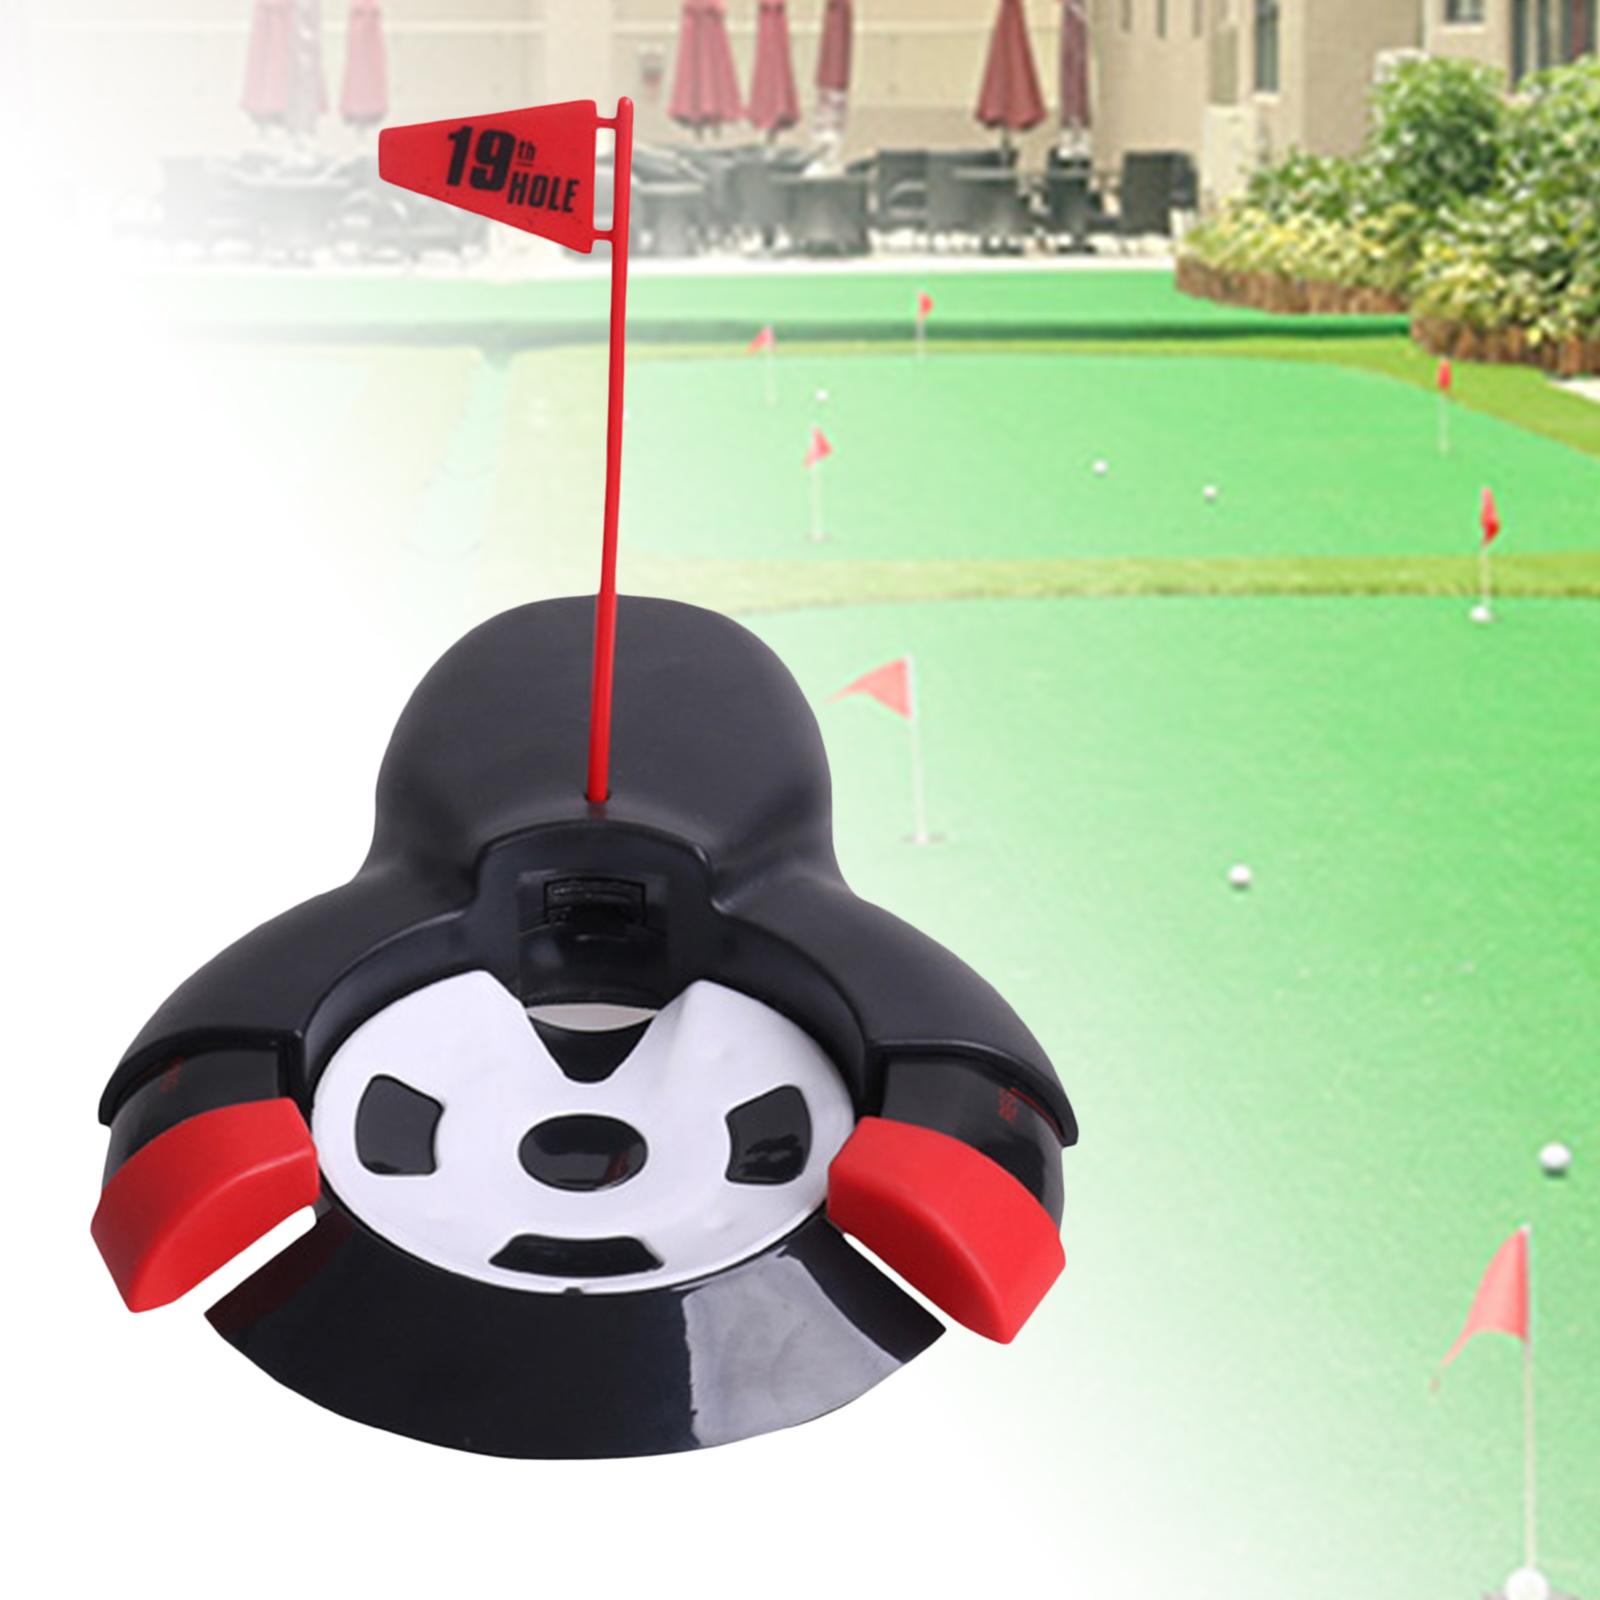 Portable Golf Putting Practice Cup Useful Ball Return Putt Training Tool